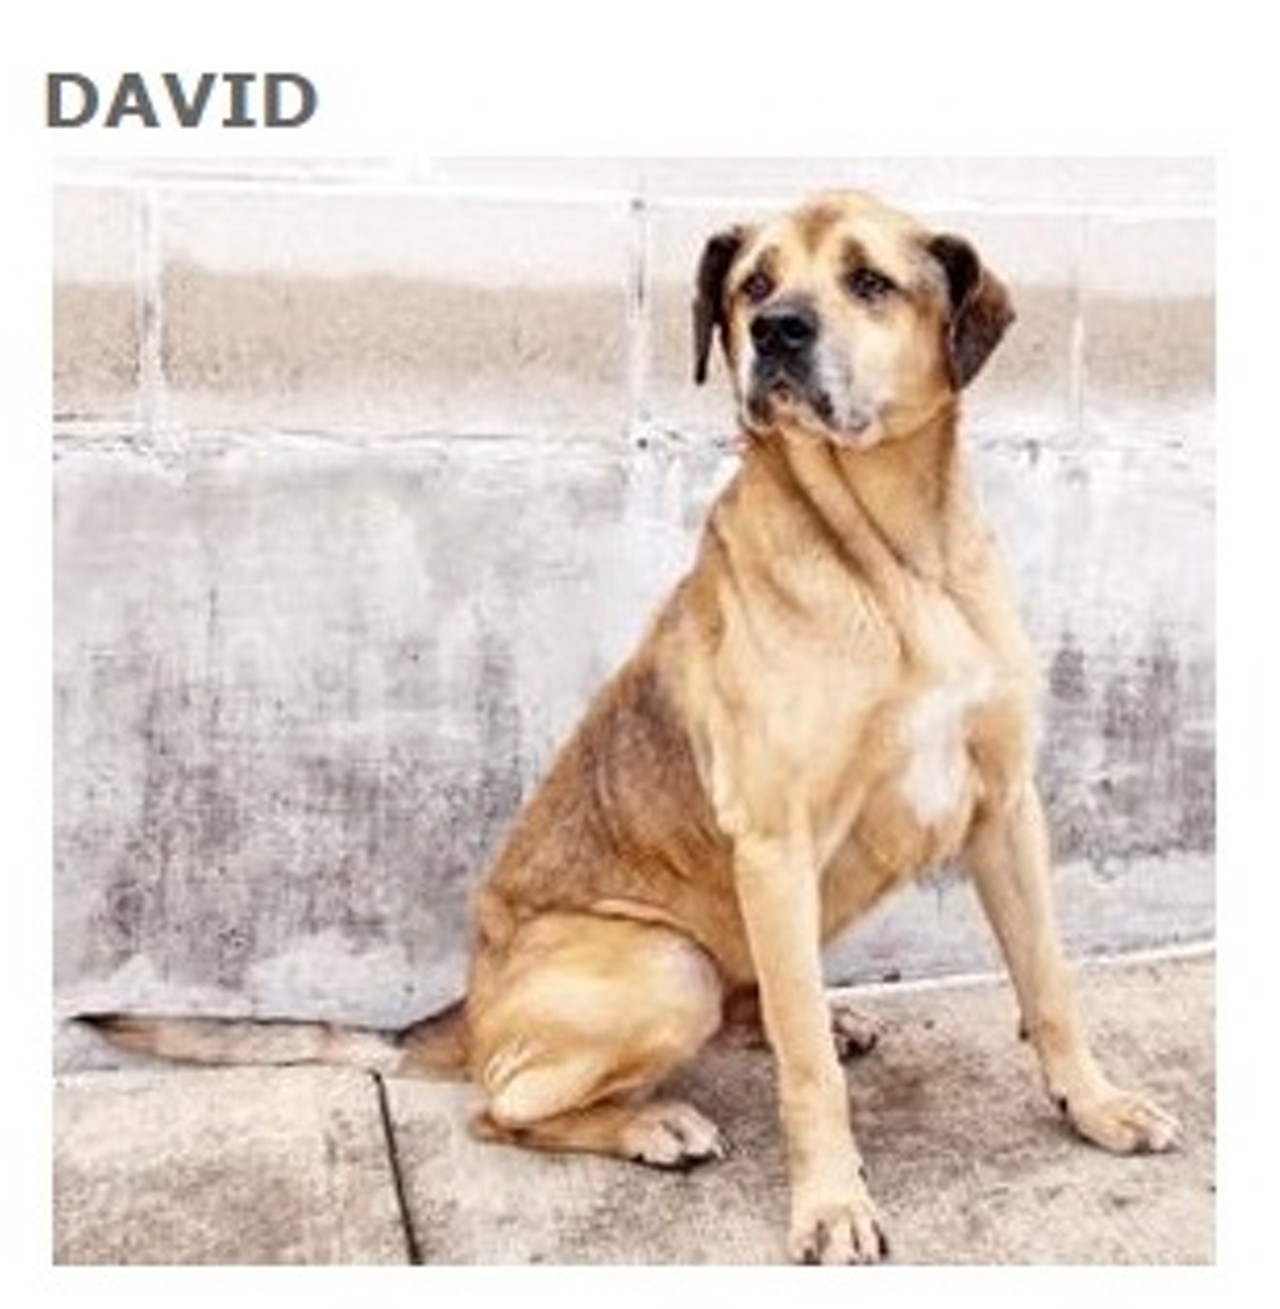 David is a tan and black Shepherd mix, he is about 9 years and 2 months. He currently lives at the San Antonio Humane Society (ID #497883). He and other awesome pets like him will be available for adoption this Saturday May 23rd at Bark in the Park&#151;Perrito Grito at Rosedale Park.